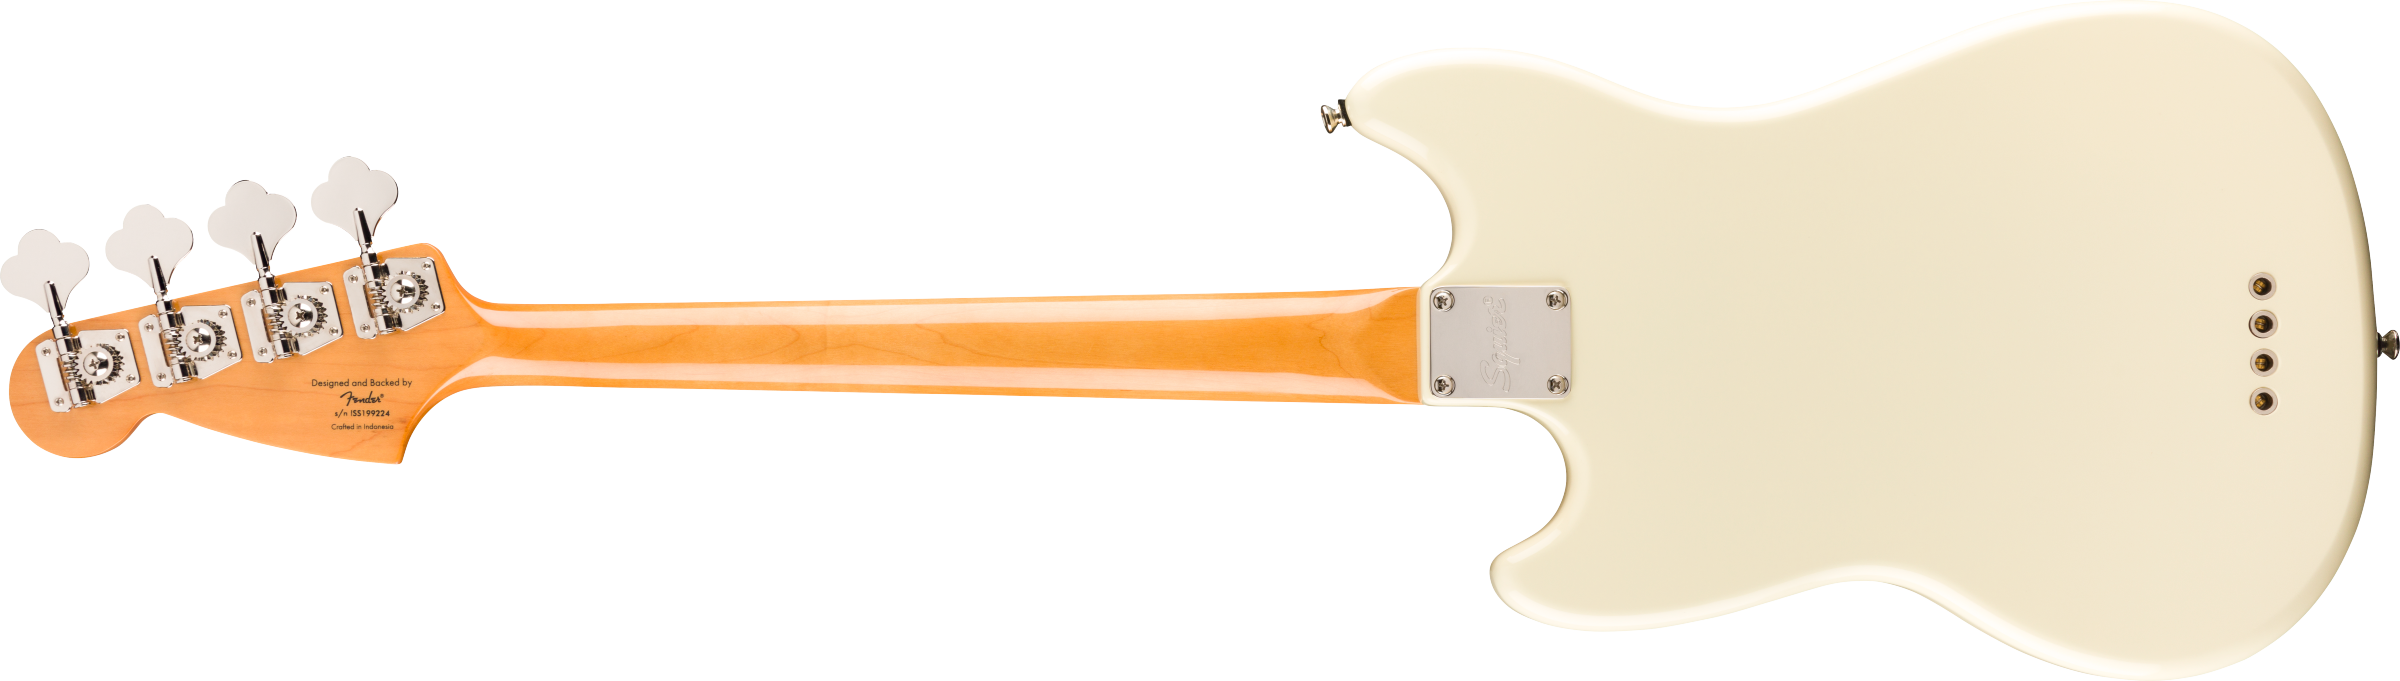 Squier Classic Vibe 60s Mustang Bass, Laurel Fingerboard, Olympic White 0374570505